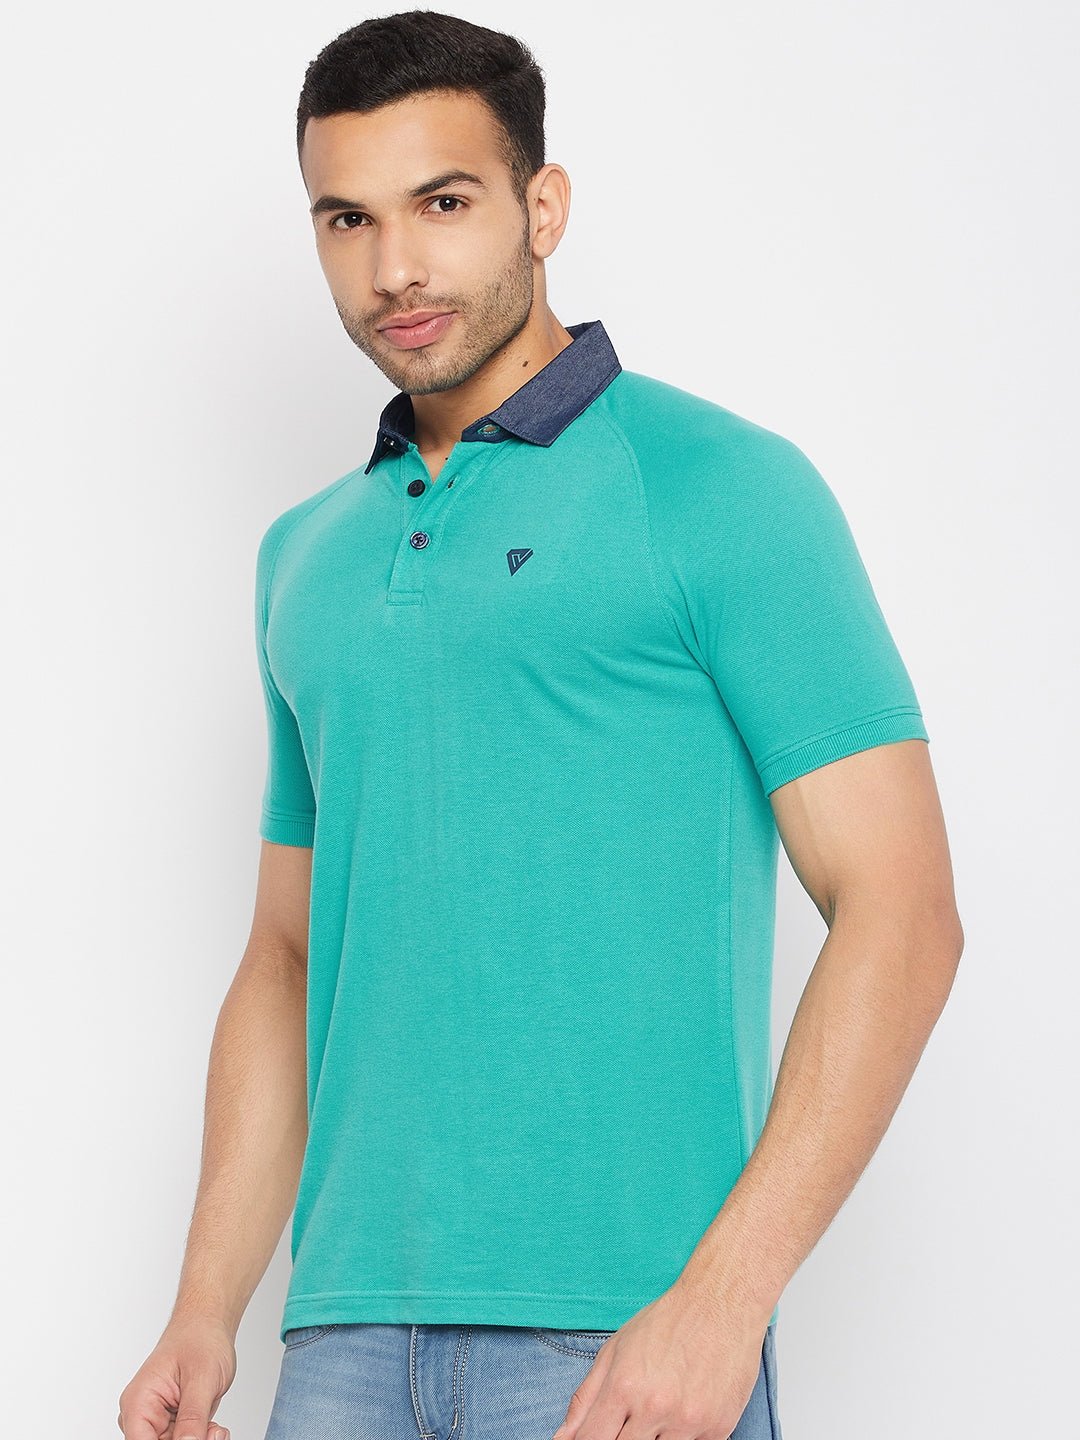 Turquoise Blue Polo T-Shirt - clubyork